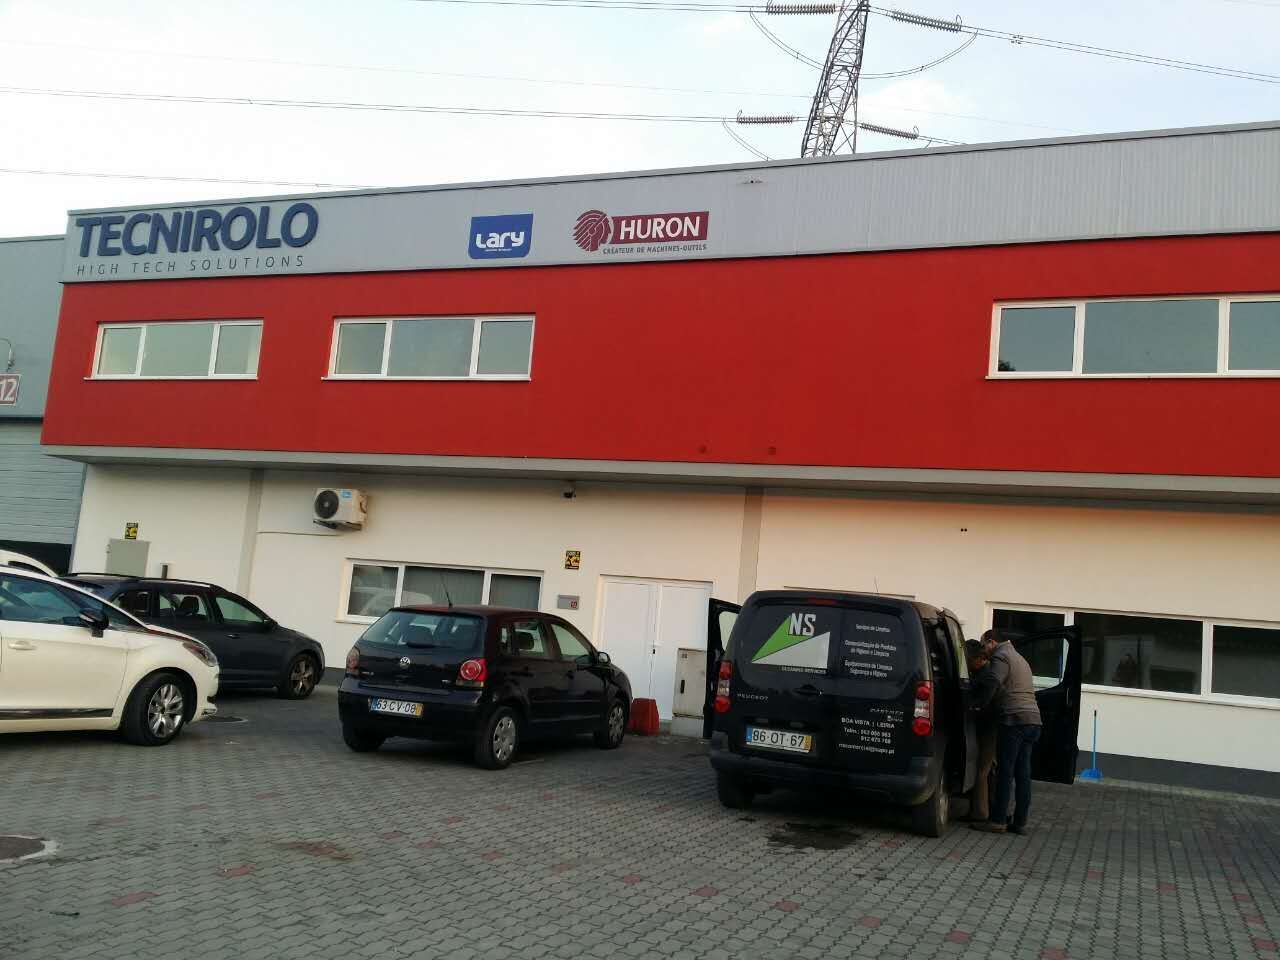 This is our headquarter Tecnirolo Portugal